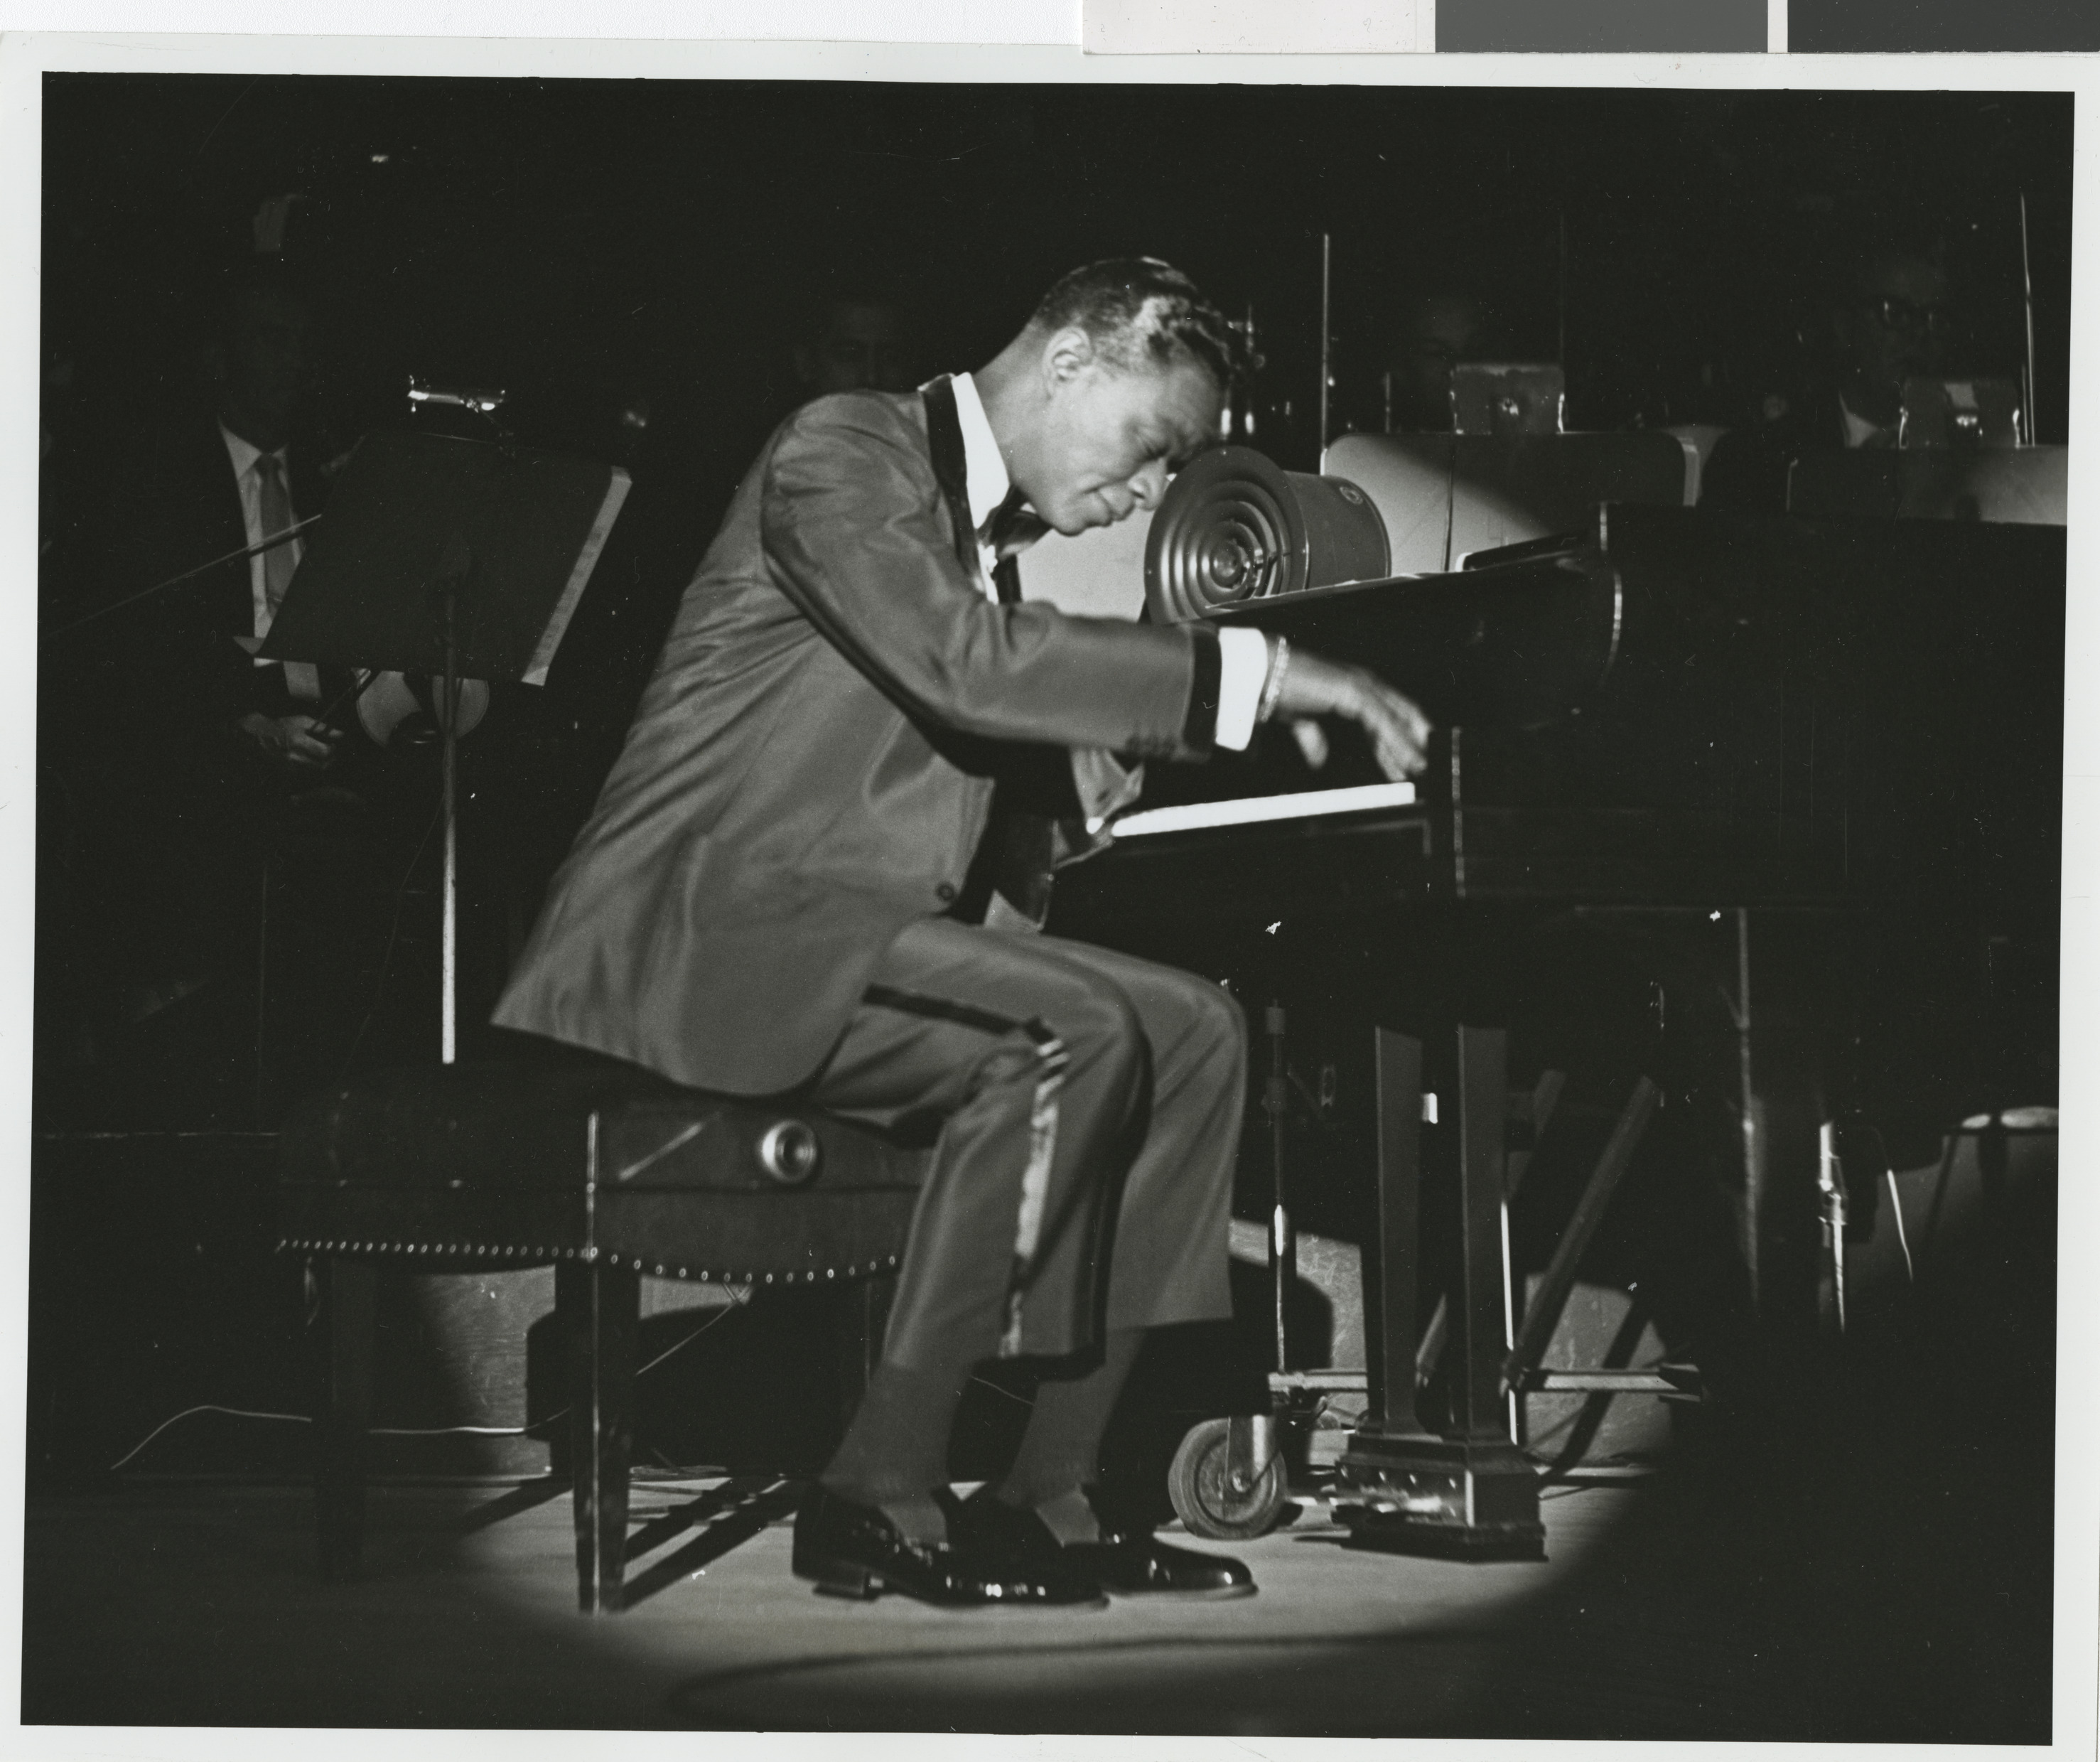 Cole onstage, image 015